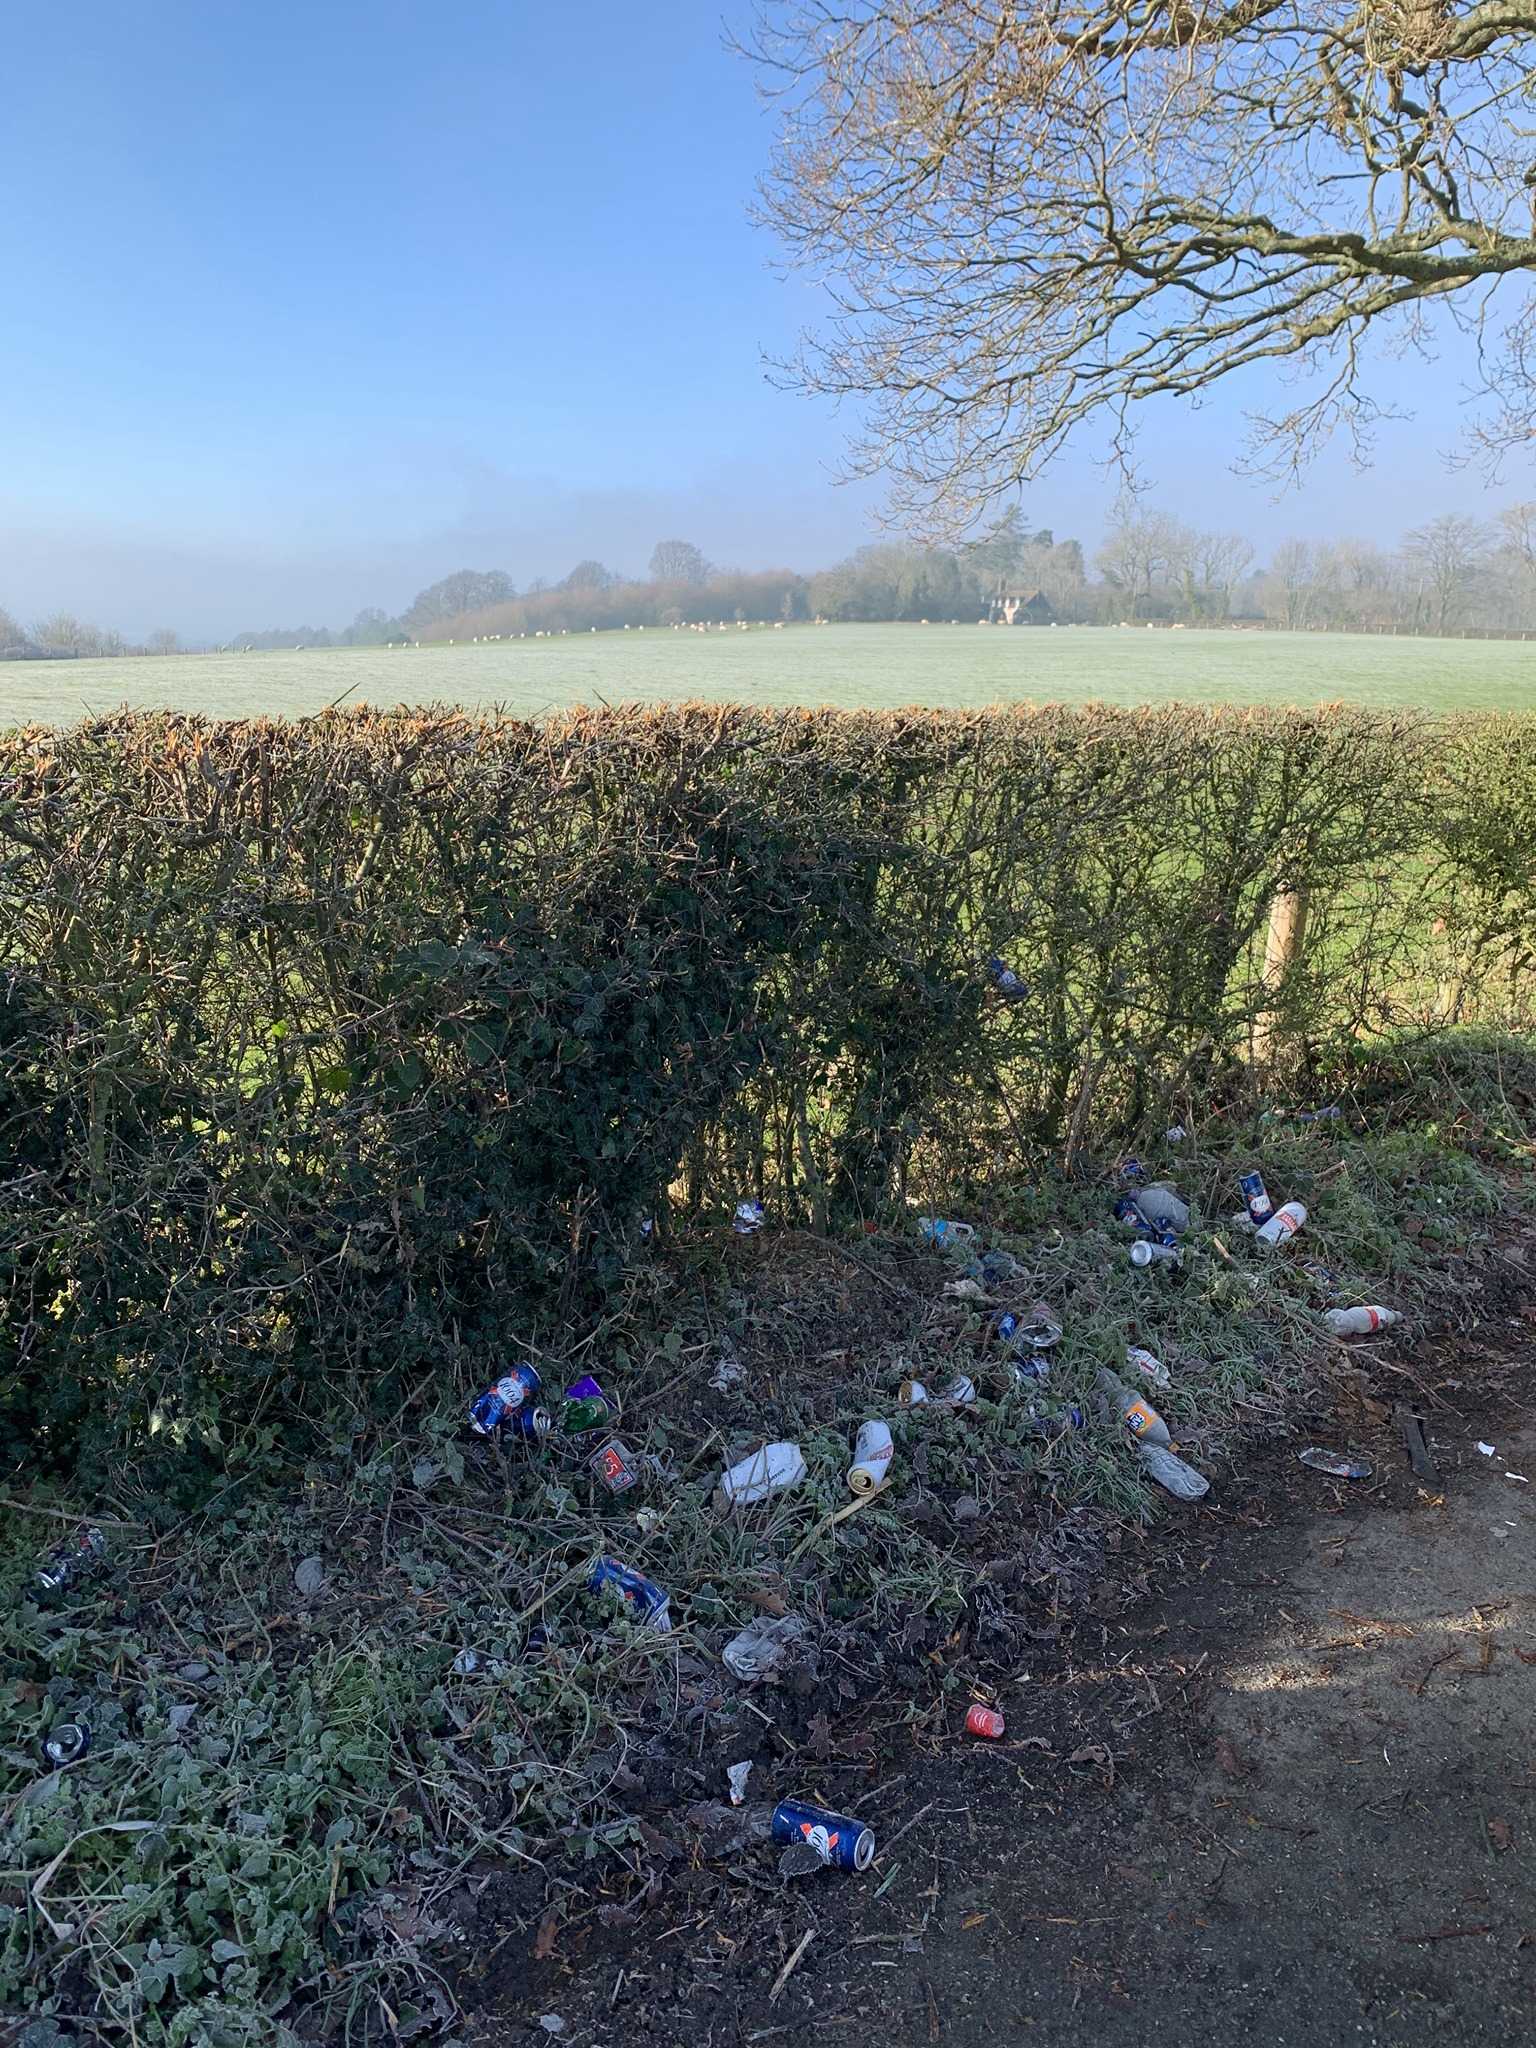 Dumped rubbish in a country hedgerow